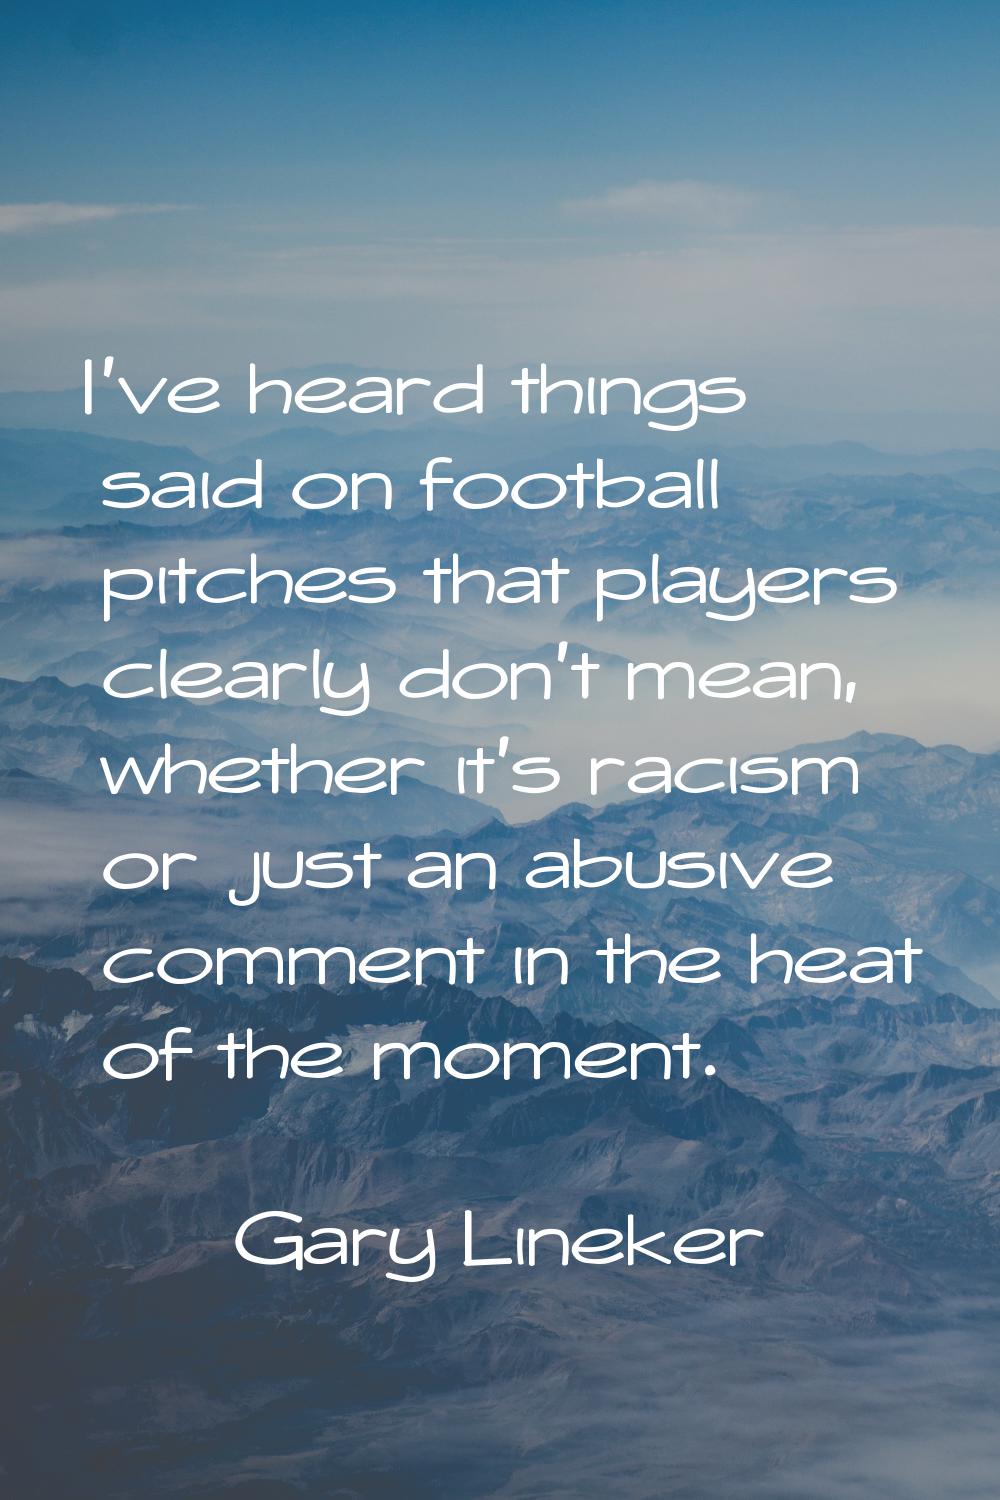 I've heard things said on football pitches that players clearly don't mean, whether it's racism or 